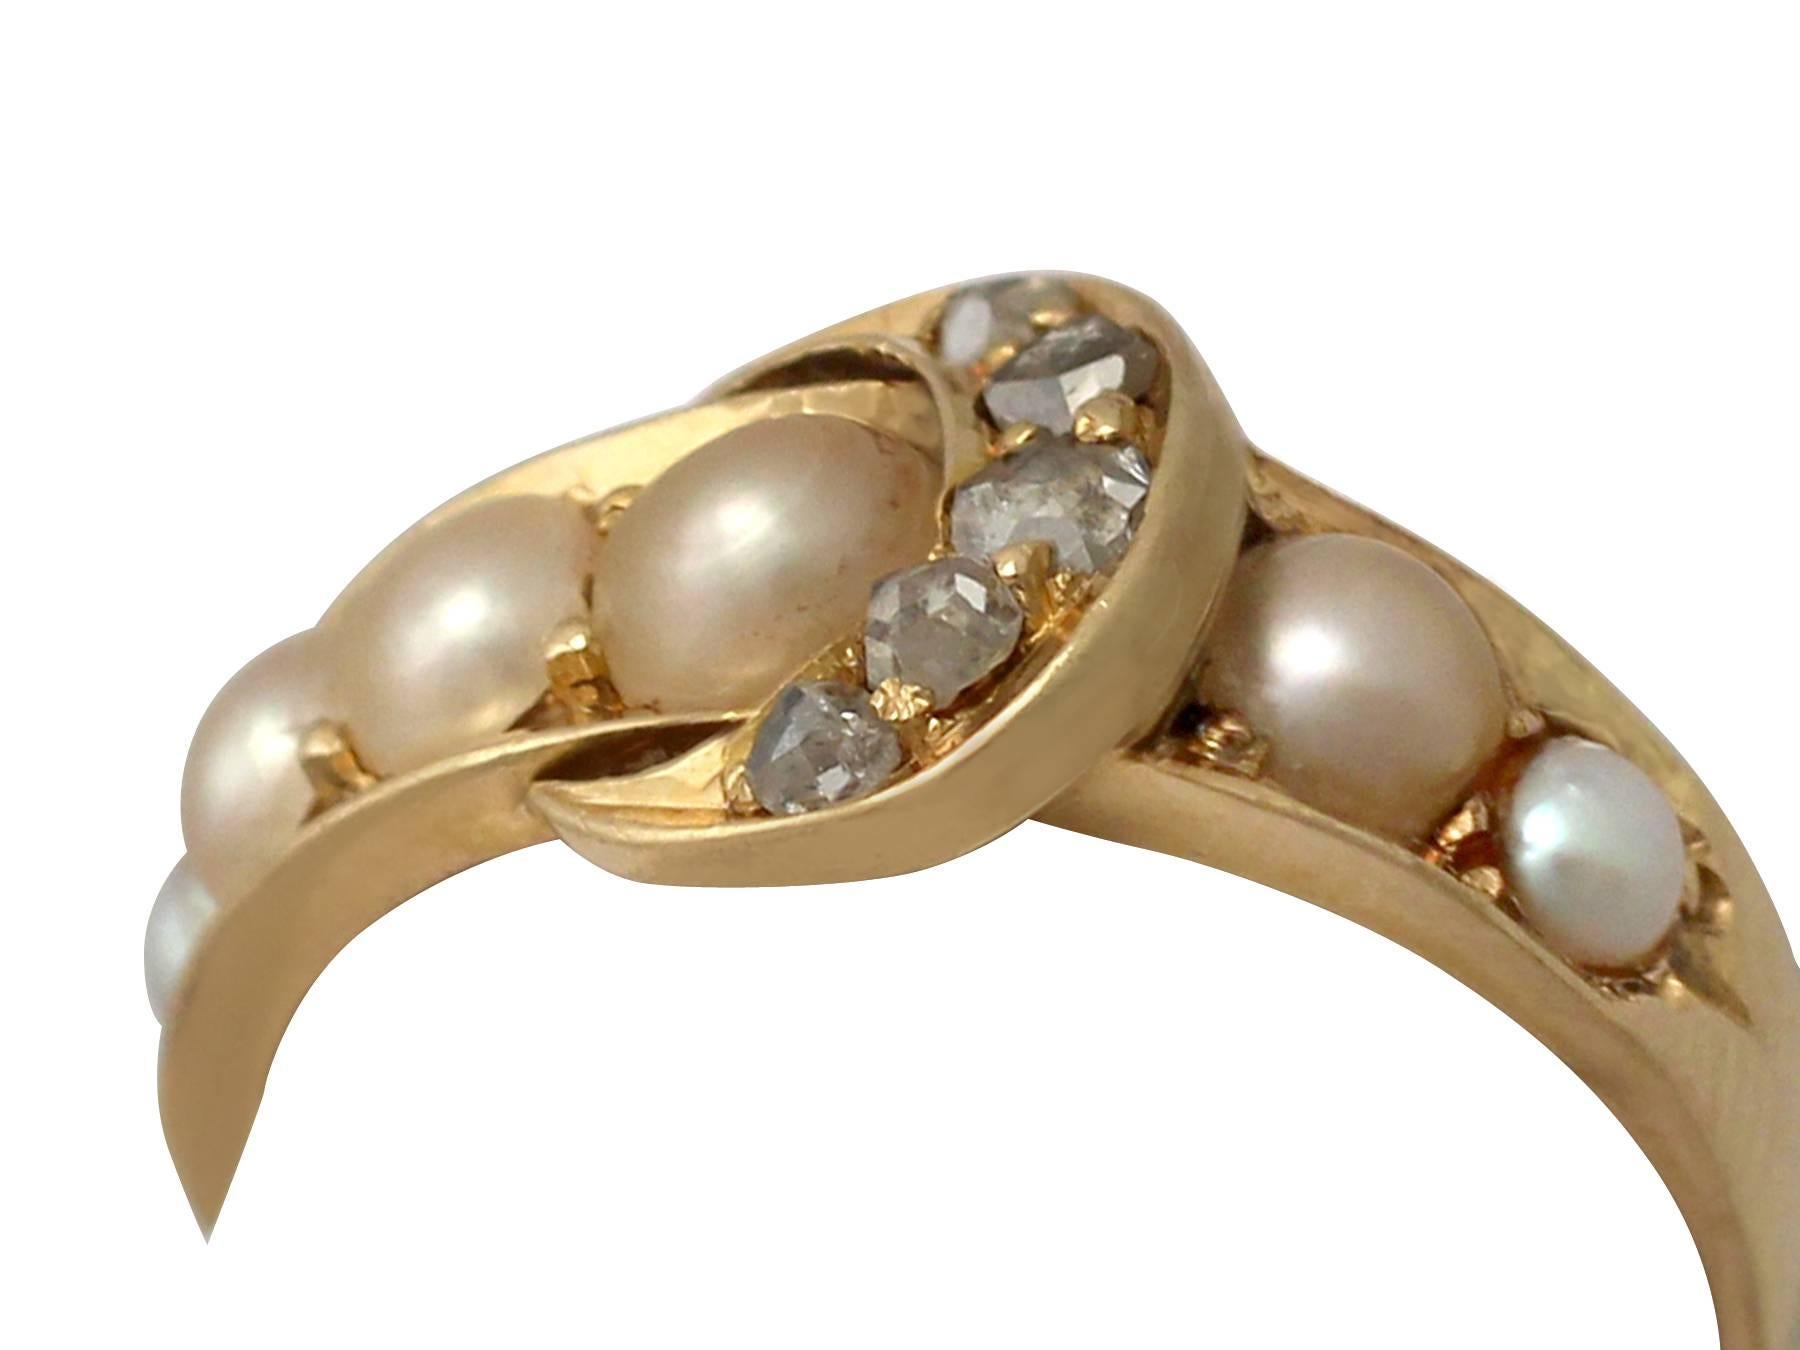 A fine and impressive antique 0.15 carat diamond and pearl, 18 karat yellow gold buckle style dress ring; part of our diverse antique jewelry and estate jewelry collections

This fine and impressive ladies buckle ring has been crafted in 18 k